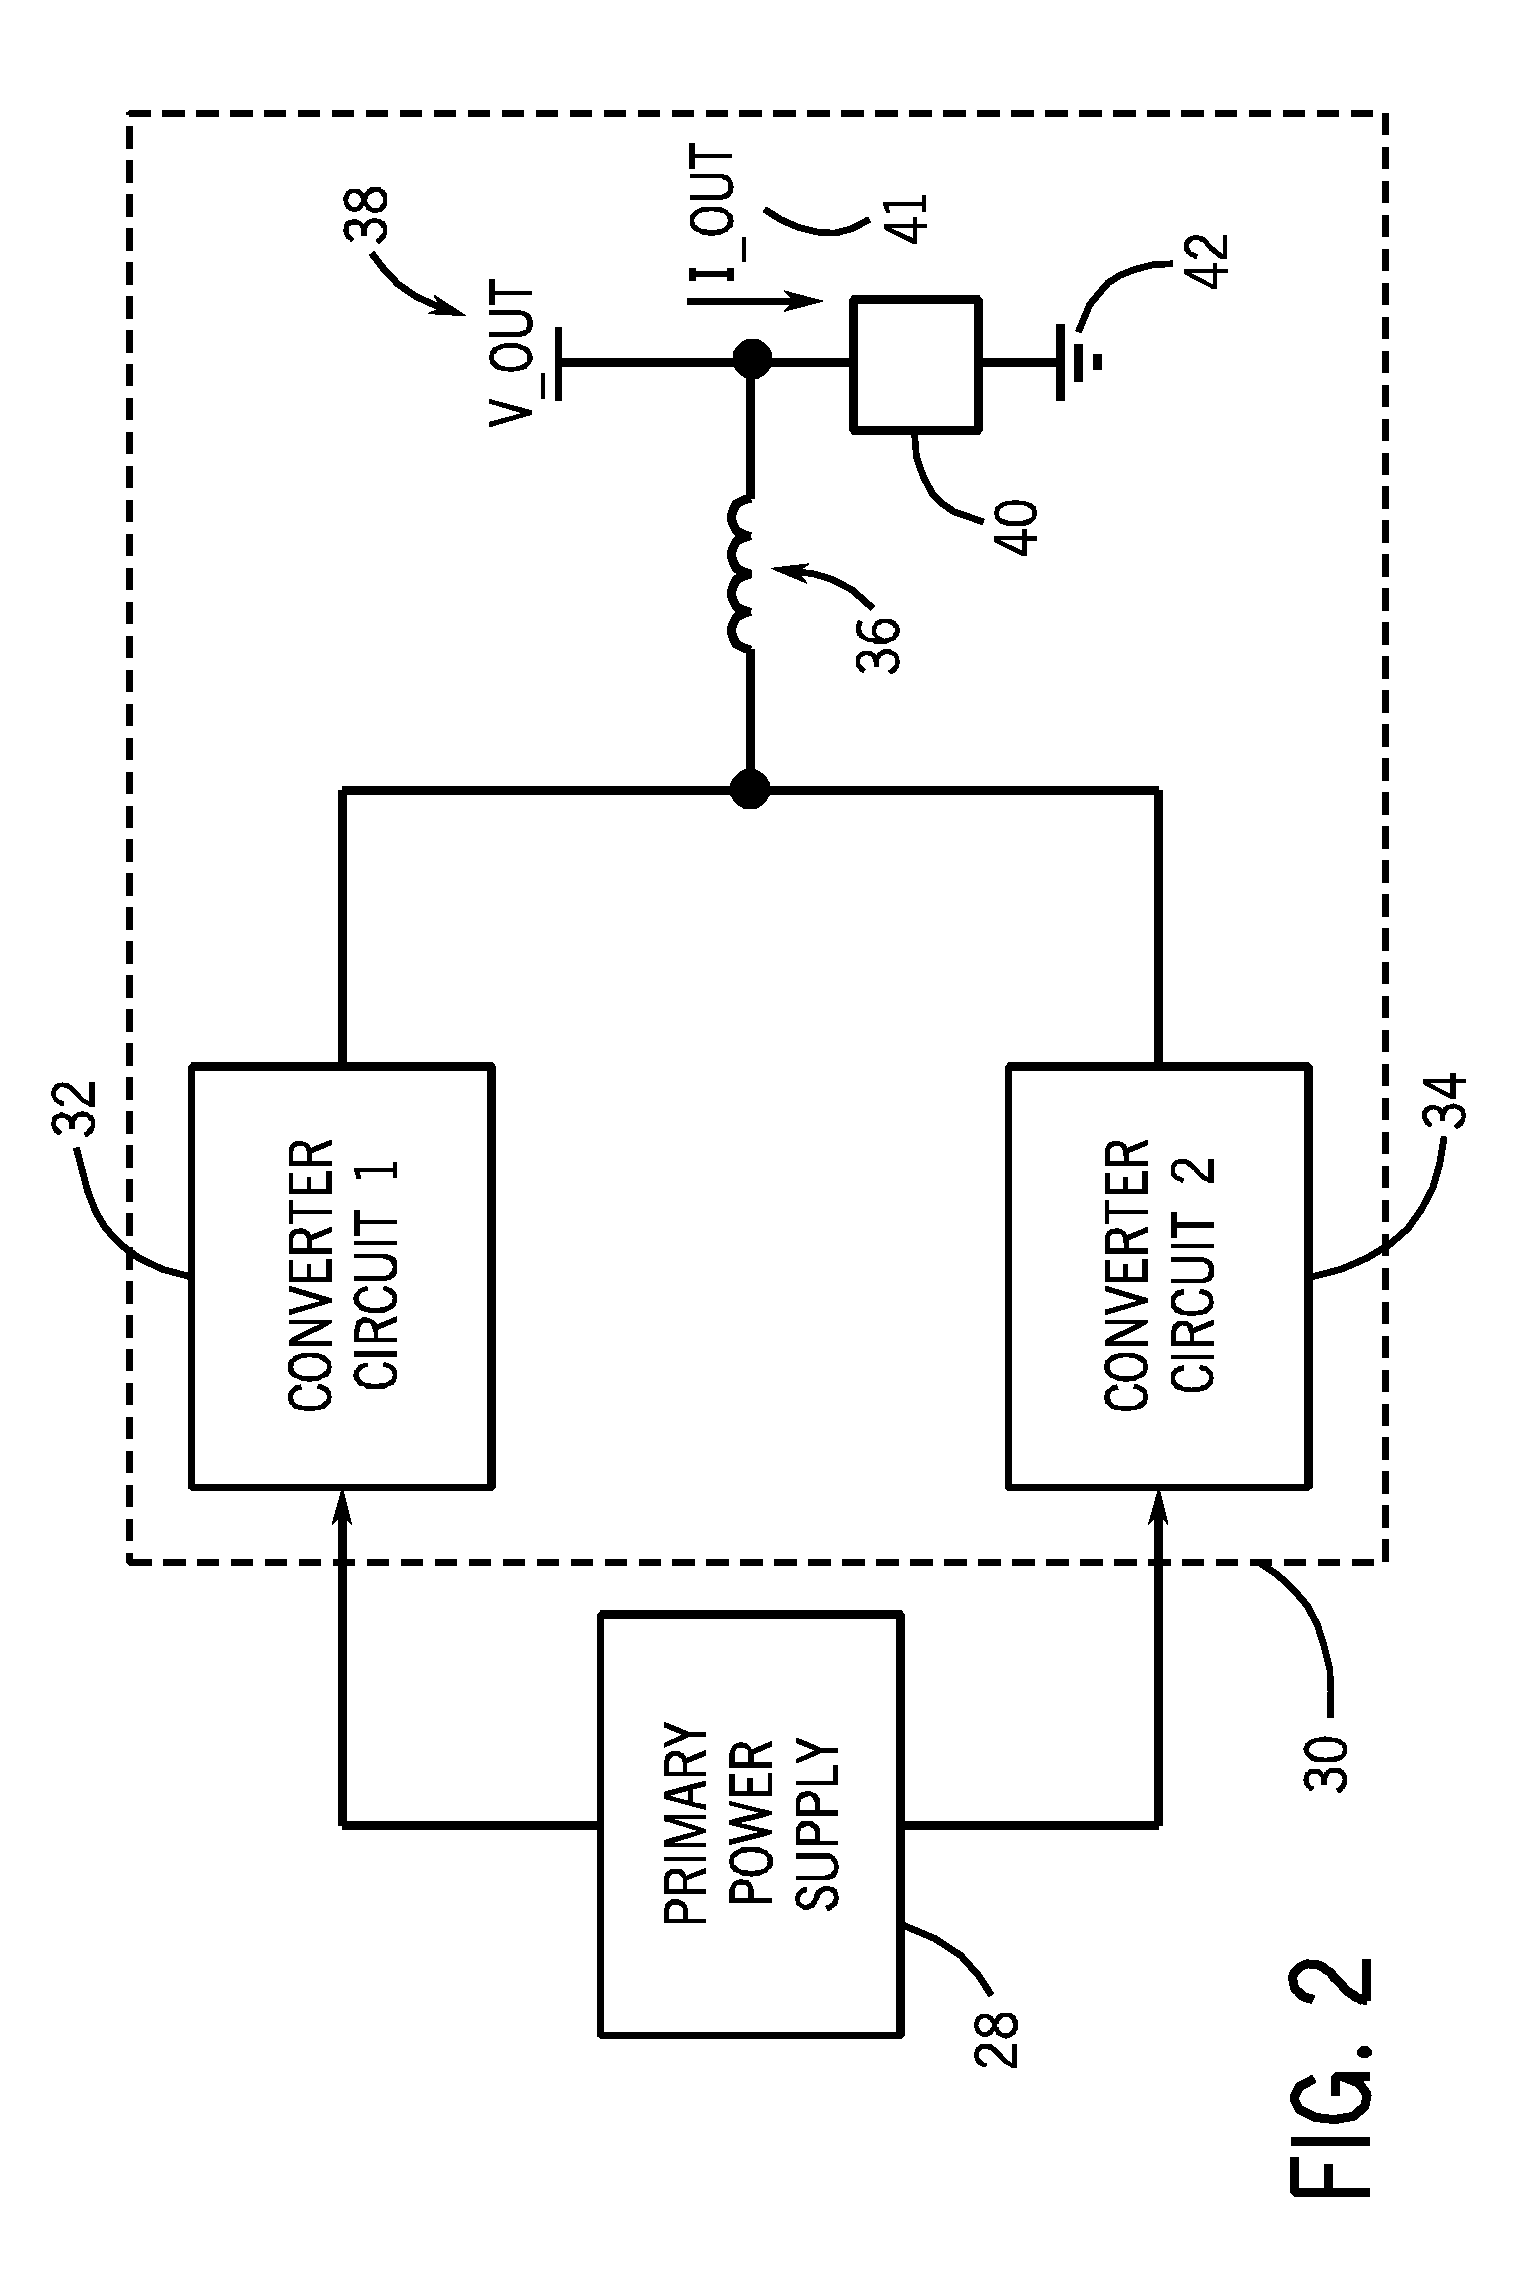 Battery charger using phase shift double forward converting circuit